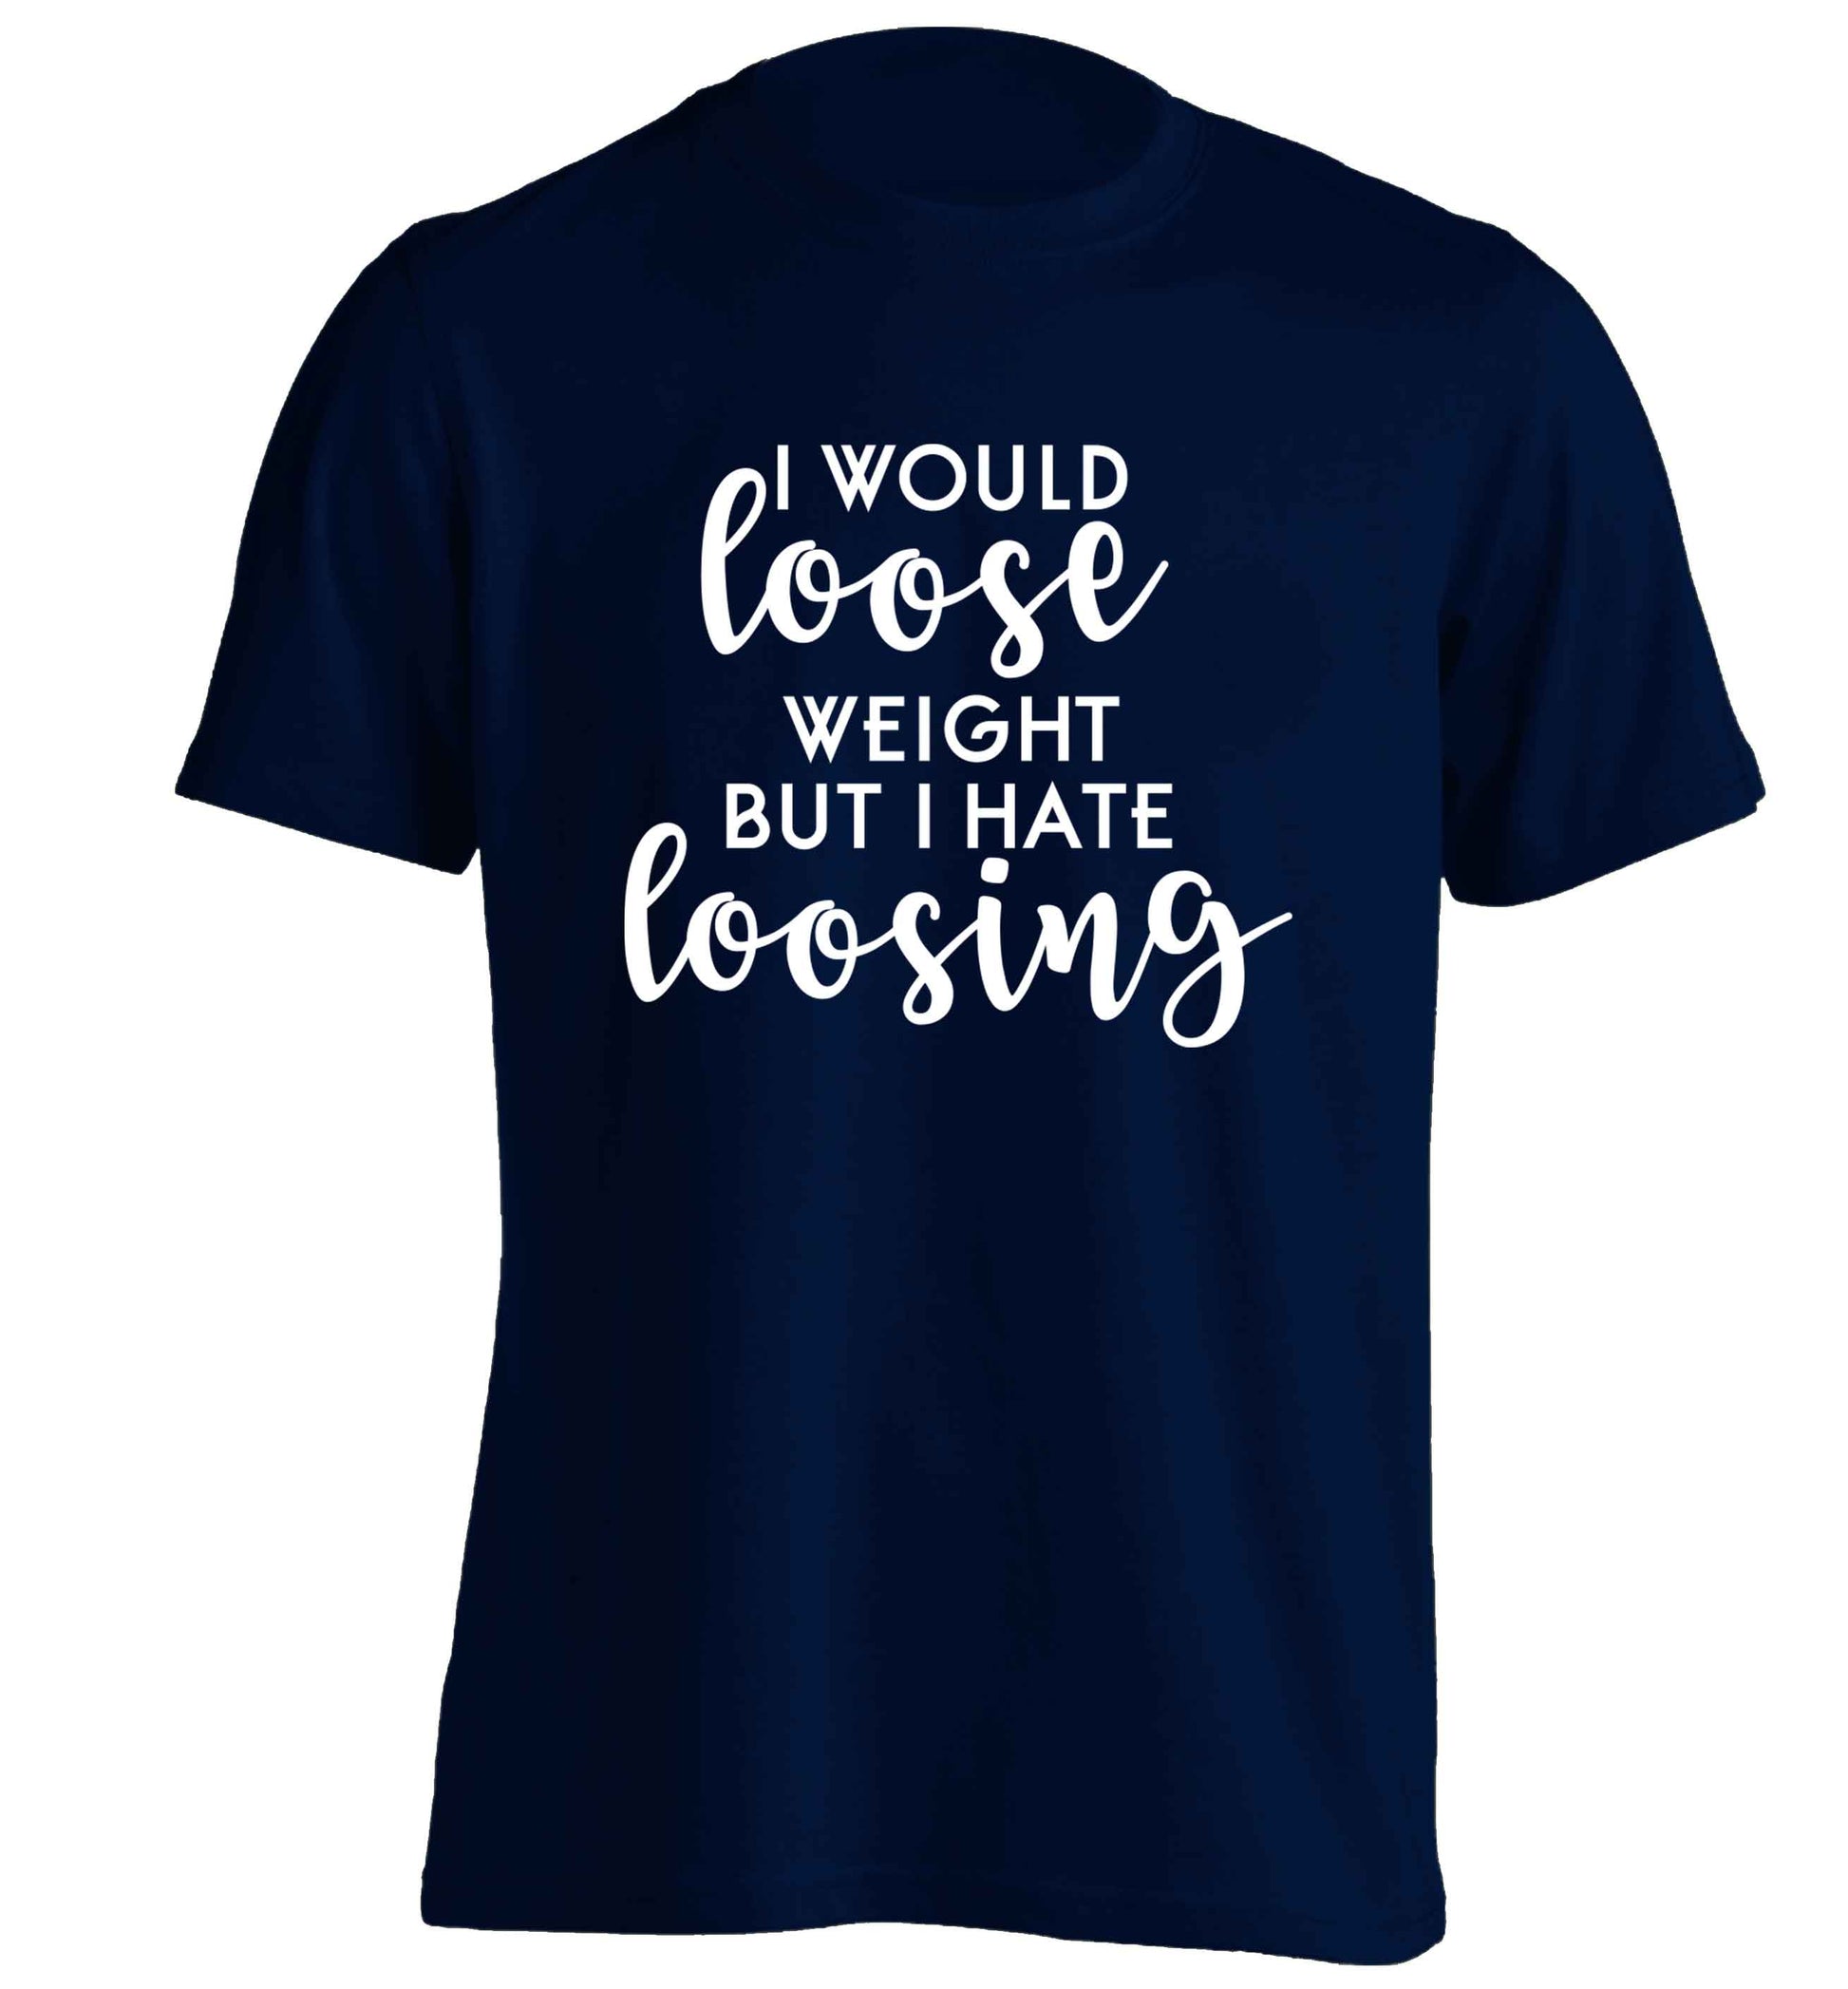 I would loose weight but I hate loosing adults unisex navy Tshirt 2XL